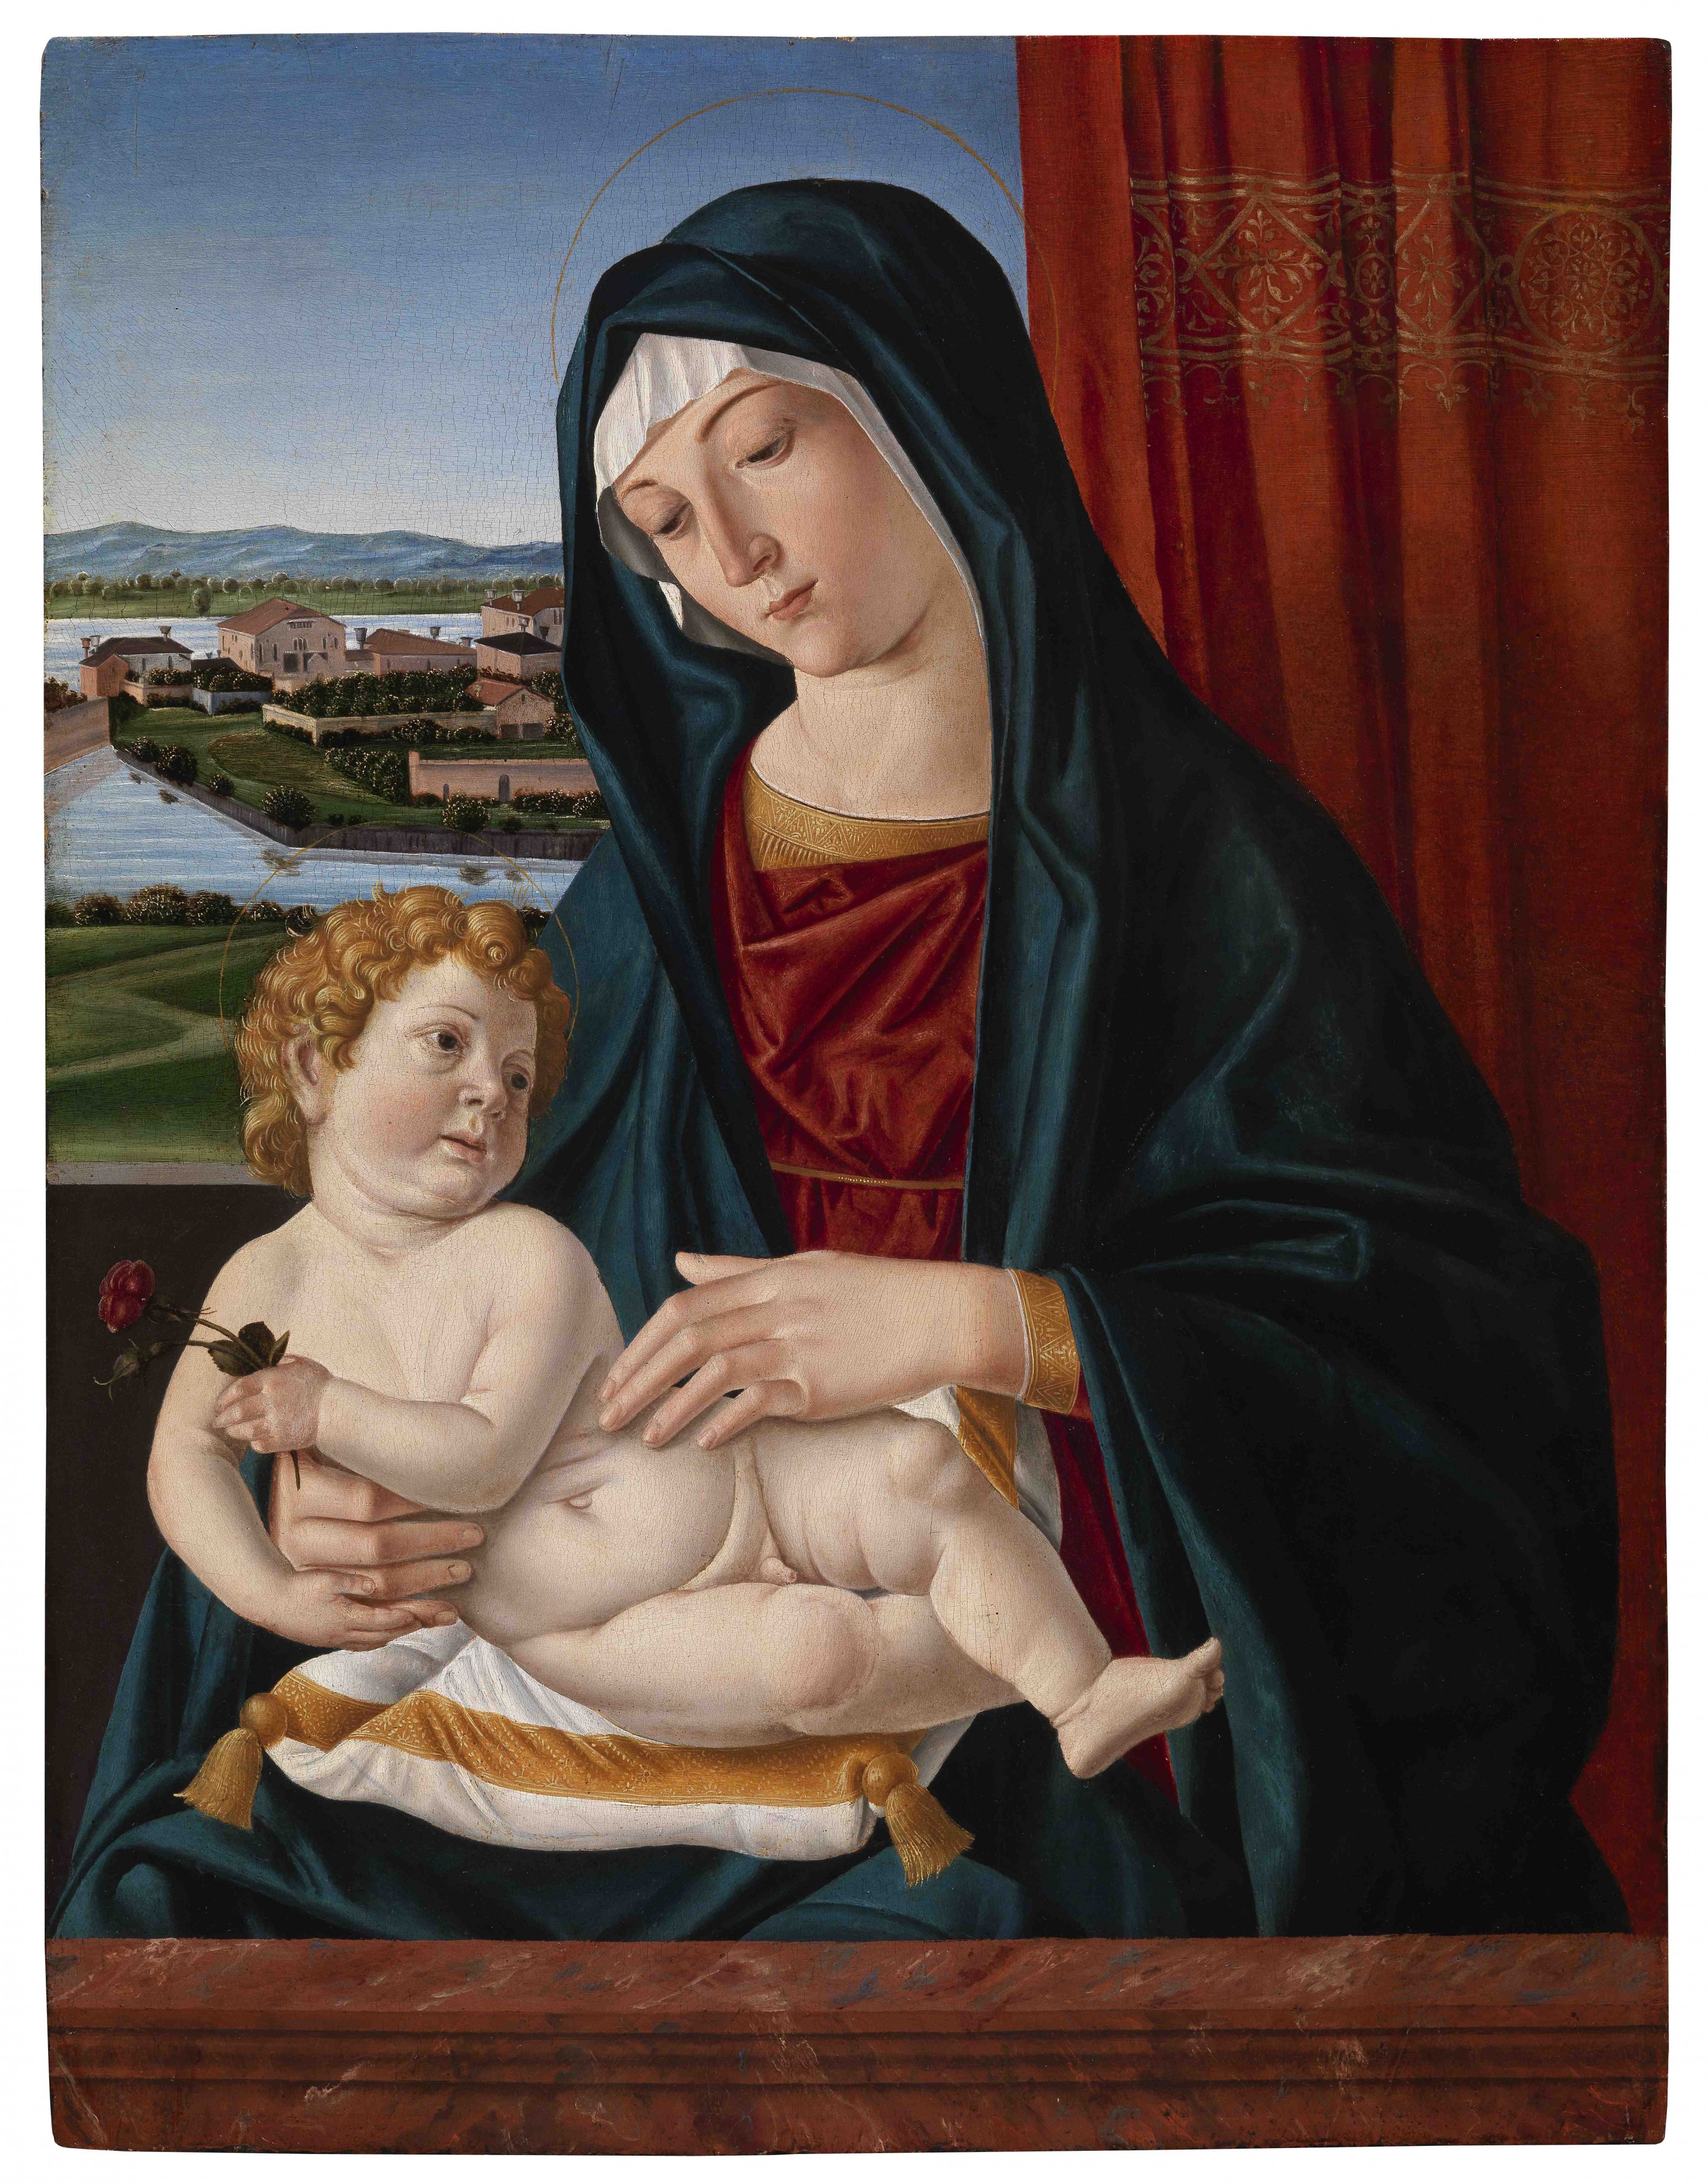 Cristoforo Caselli, Madonna and Child with a rose on a venetian lagoon background